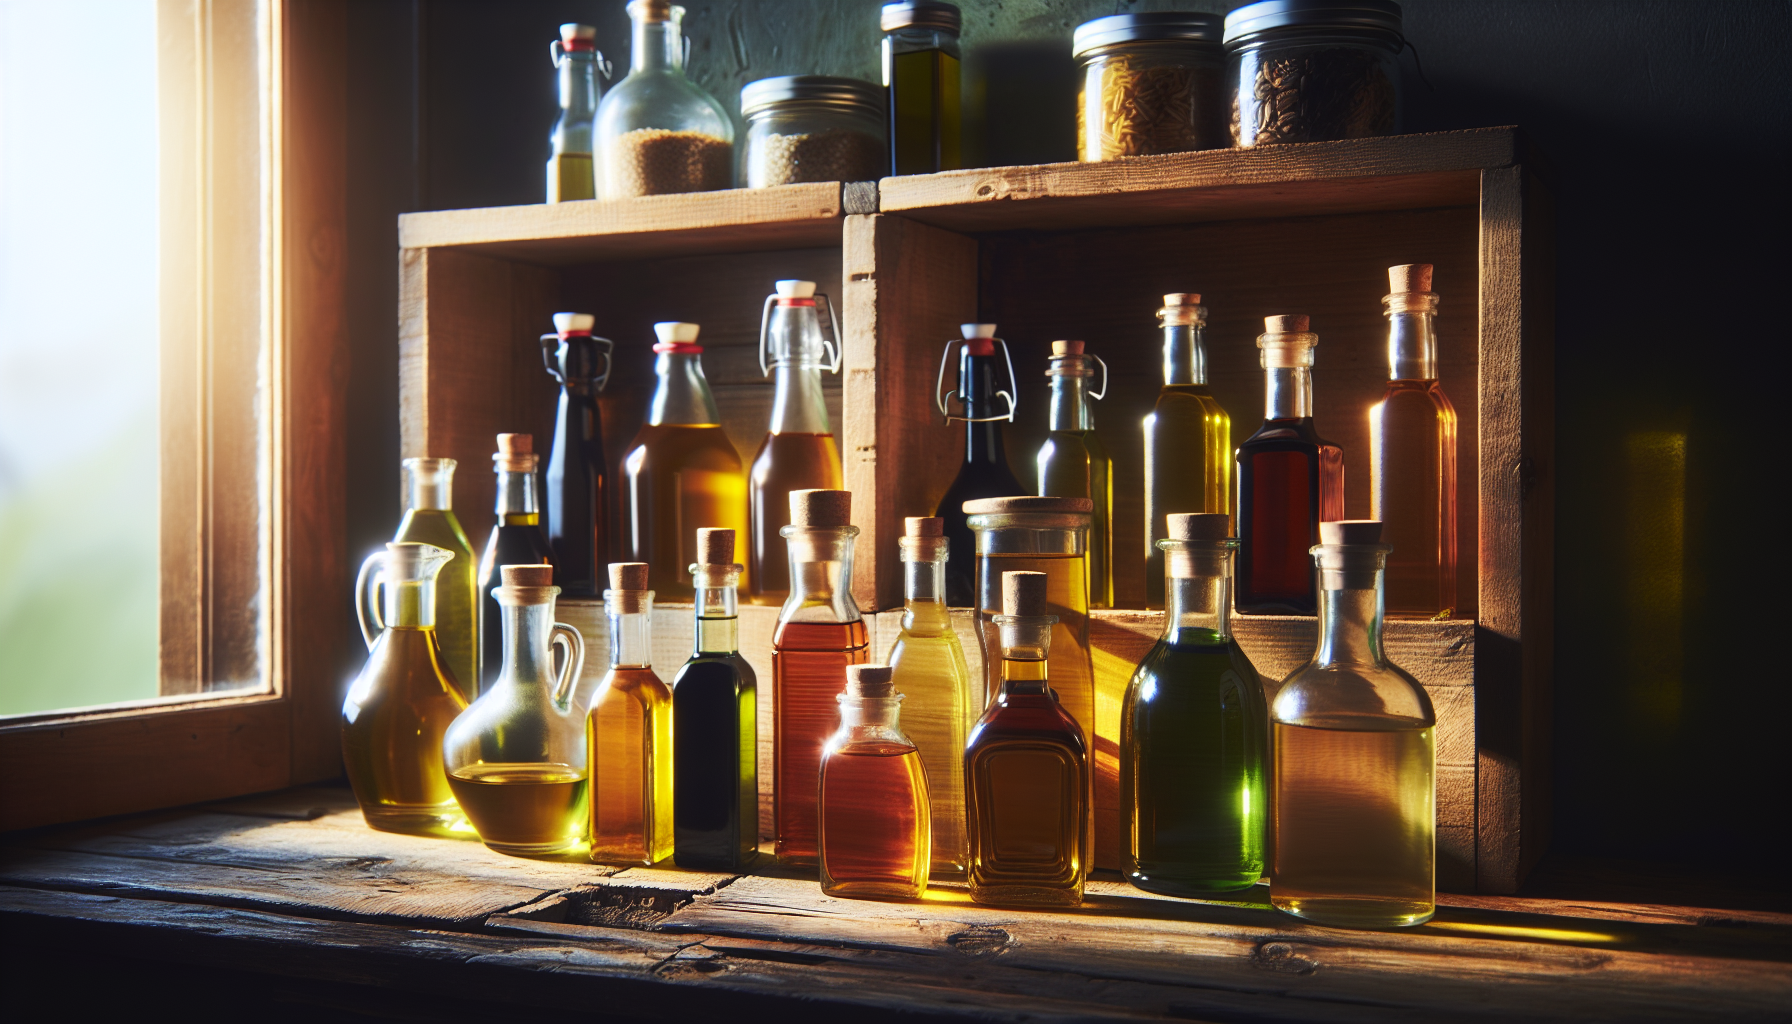 Storing and reusing cooking oils